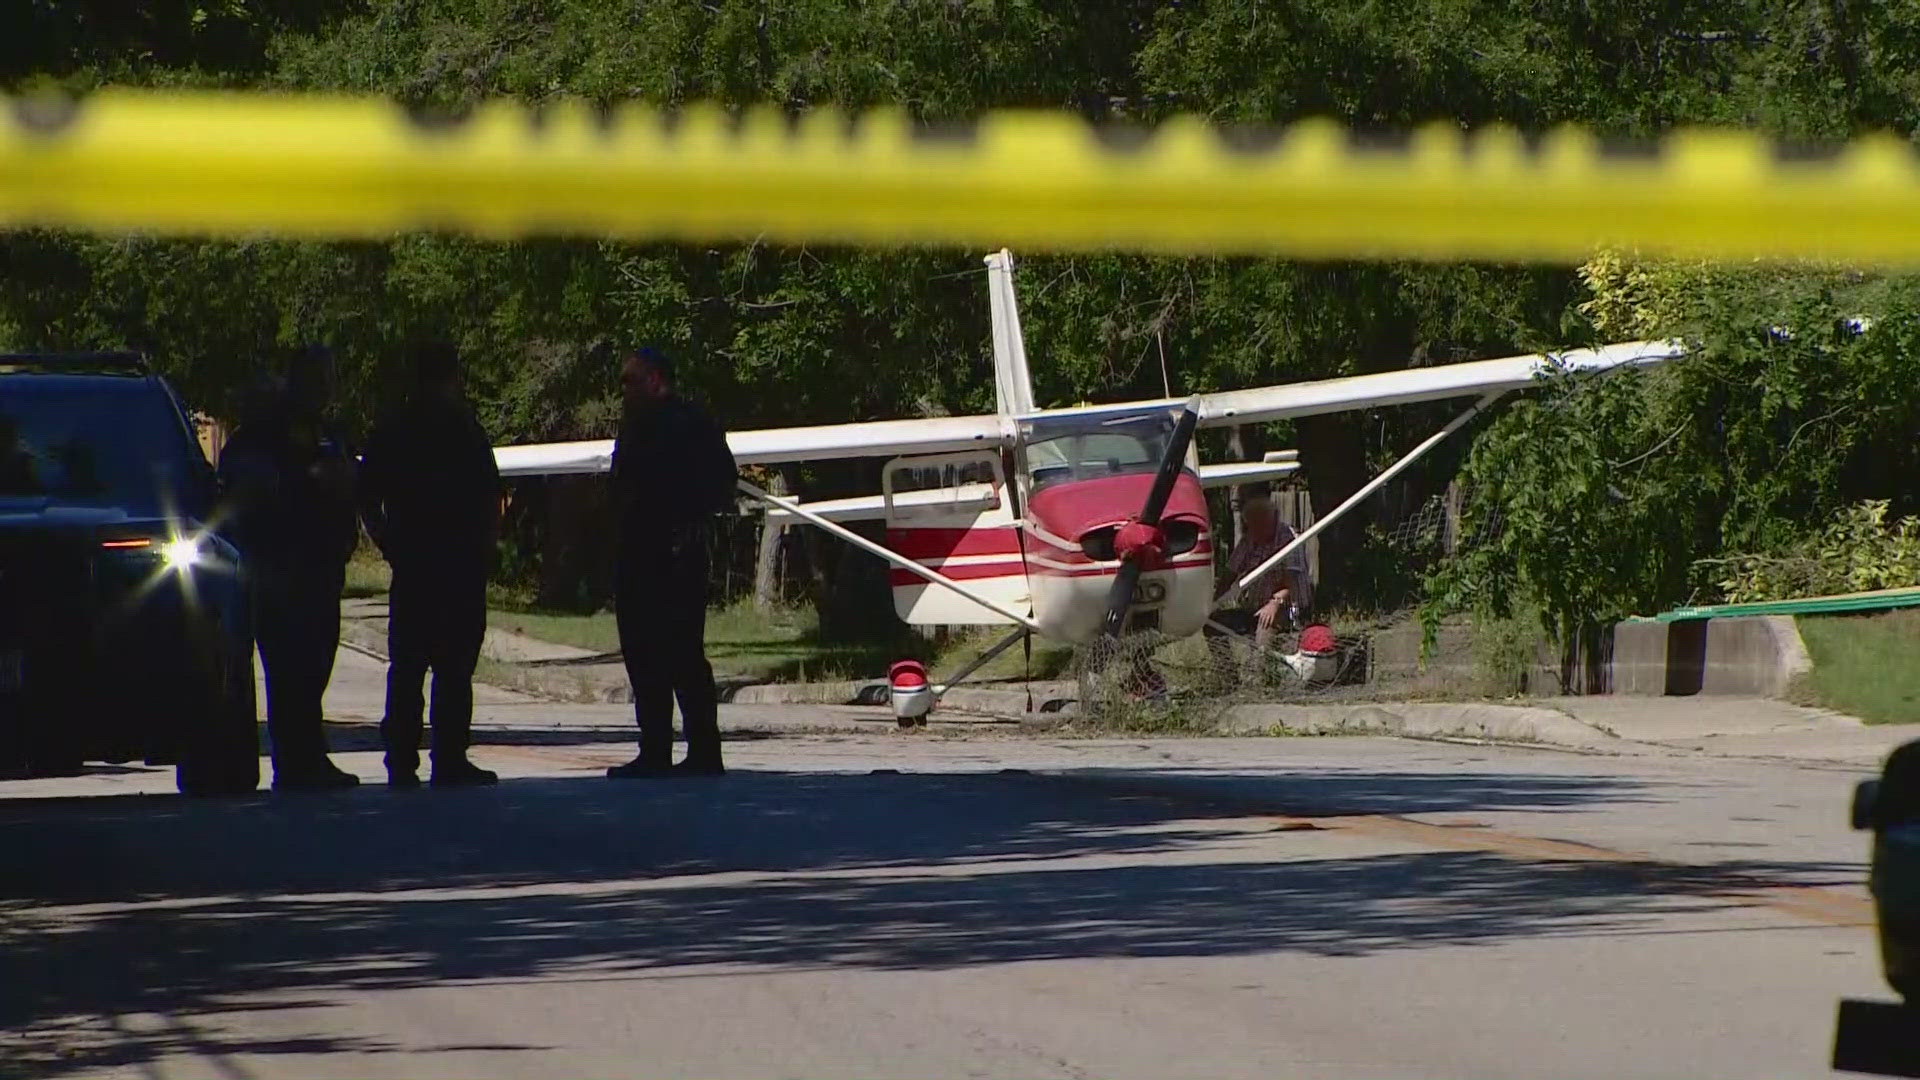 A KENS 5 viewer sent video of the small plane on the side of the road.